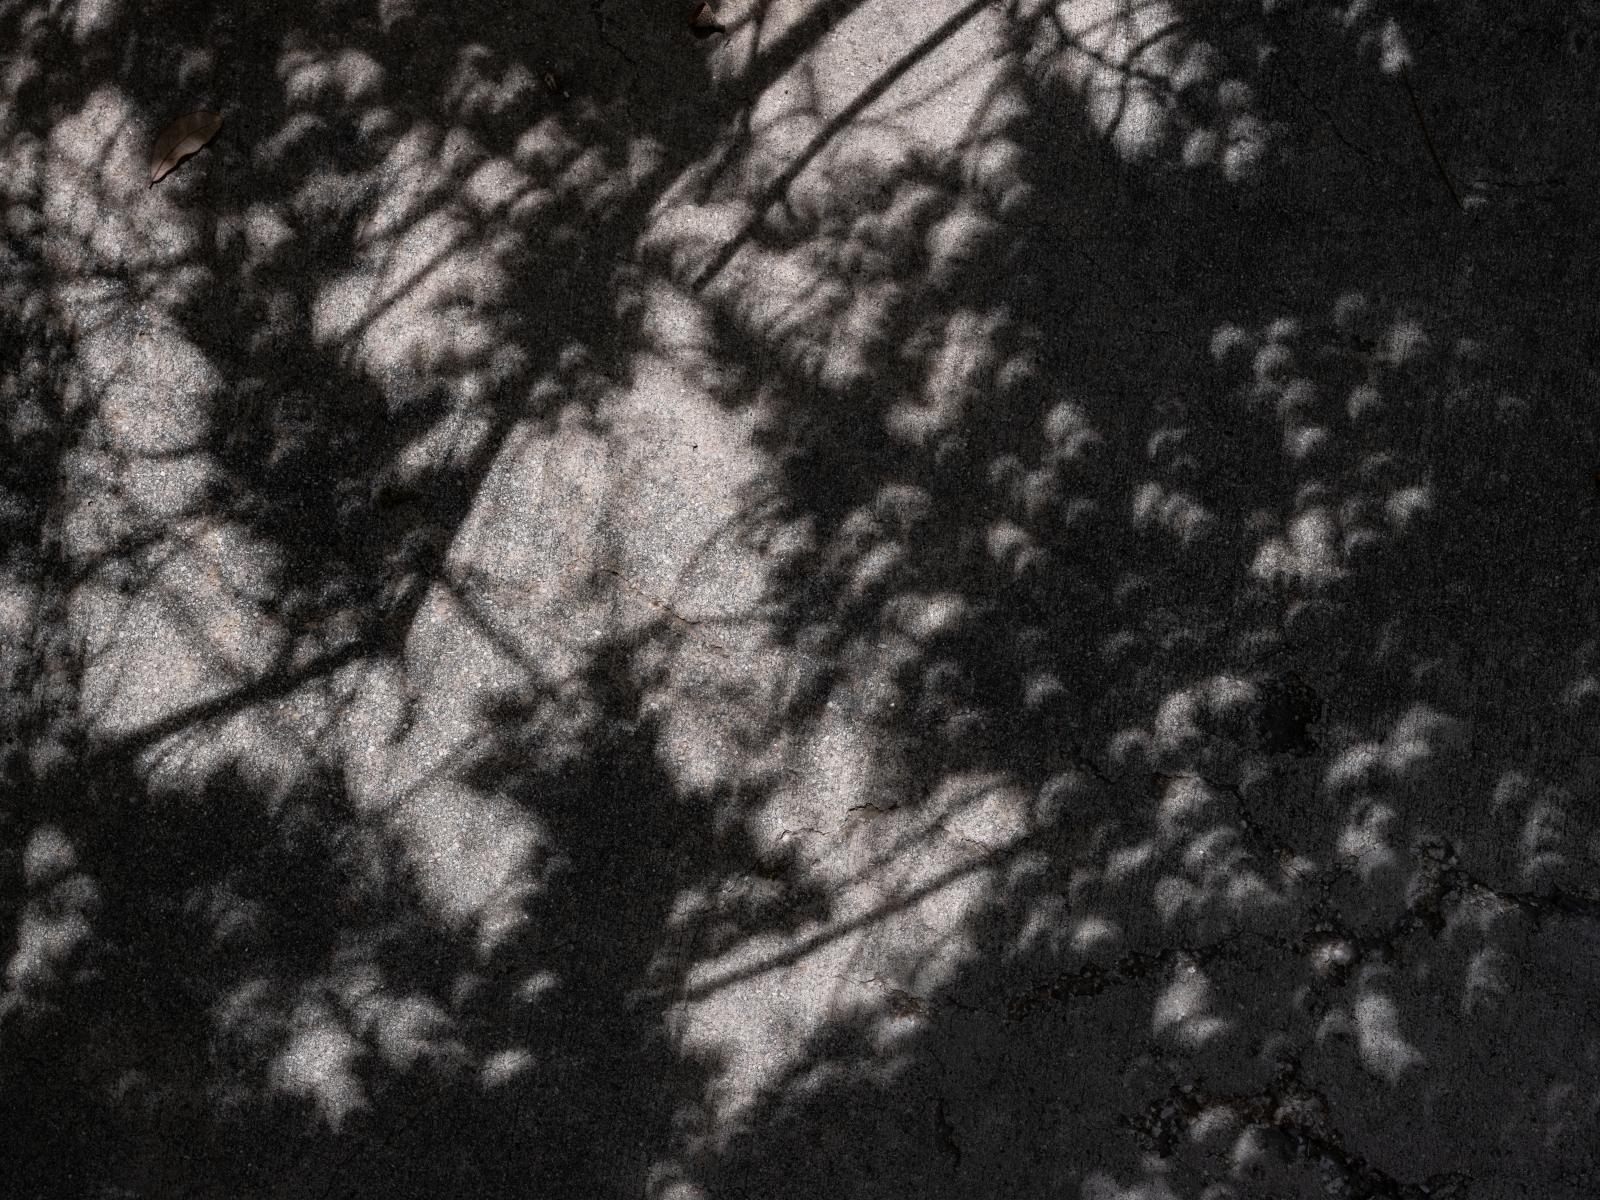 Scattered Eclipse Crescents